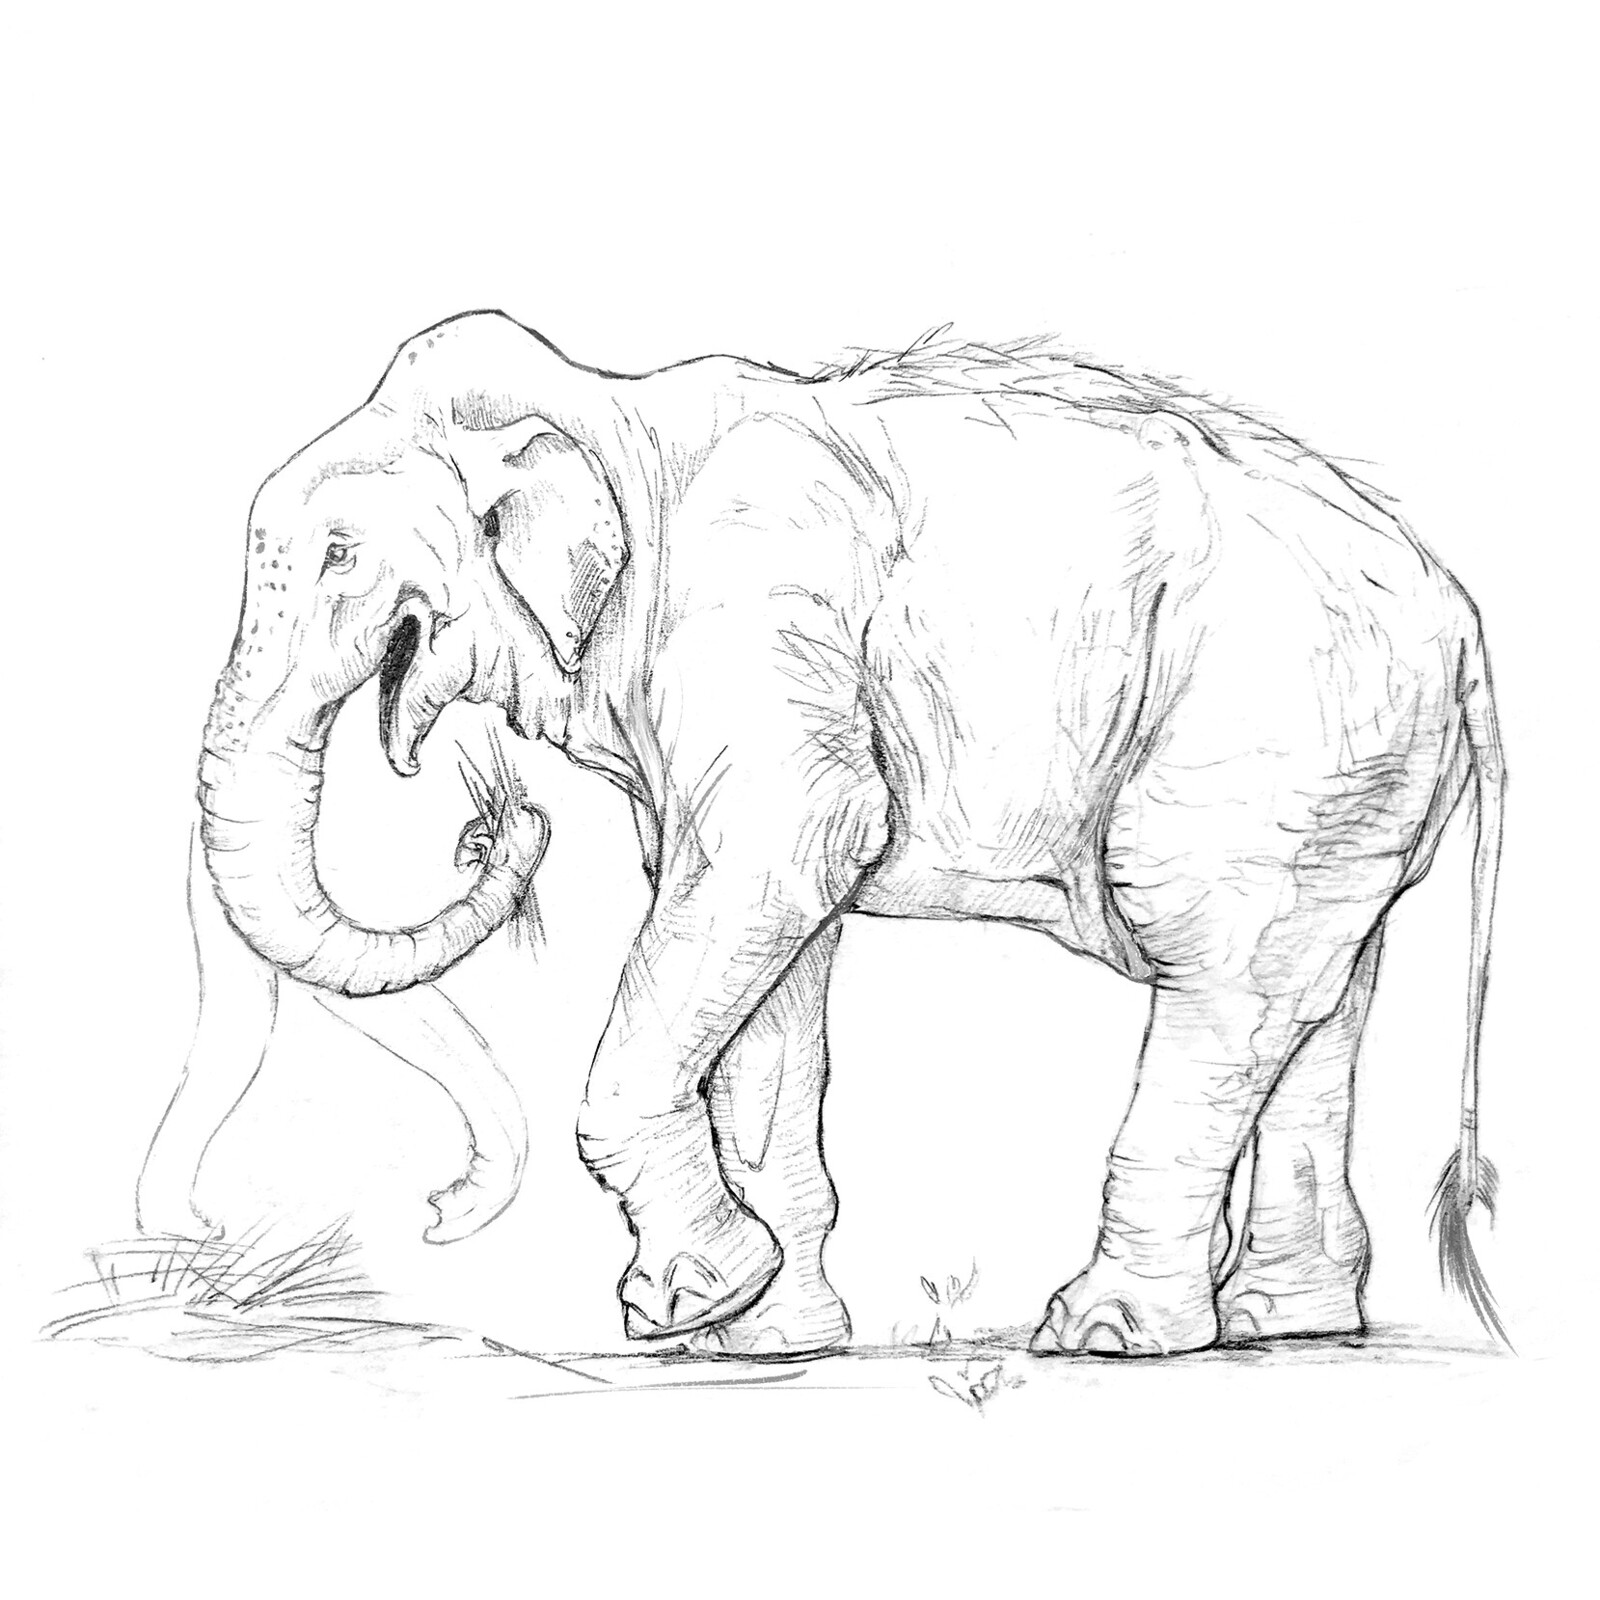 Elephant, from life. Pencil on paper.